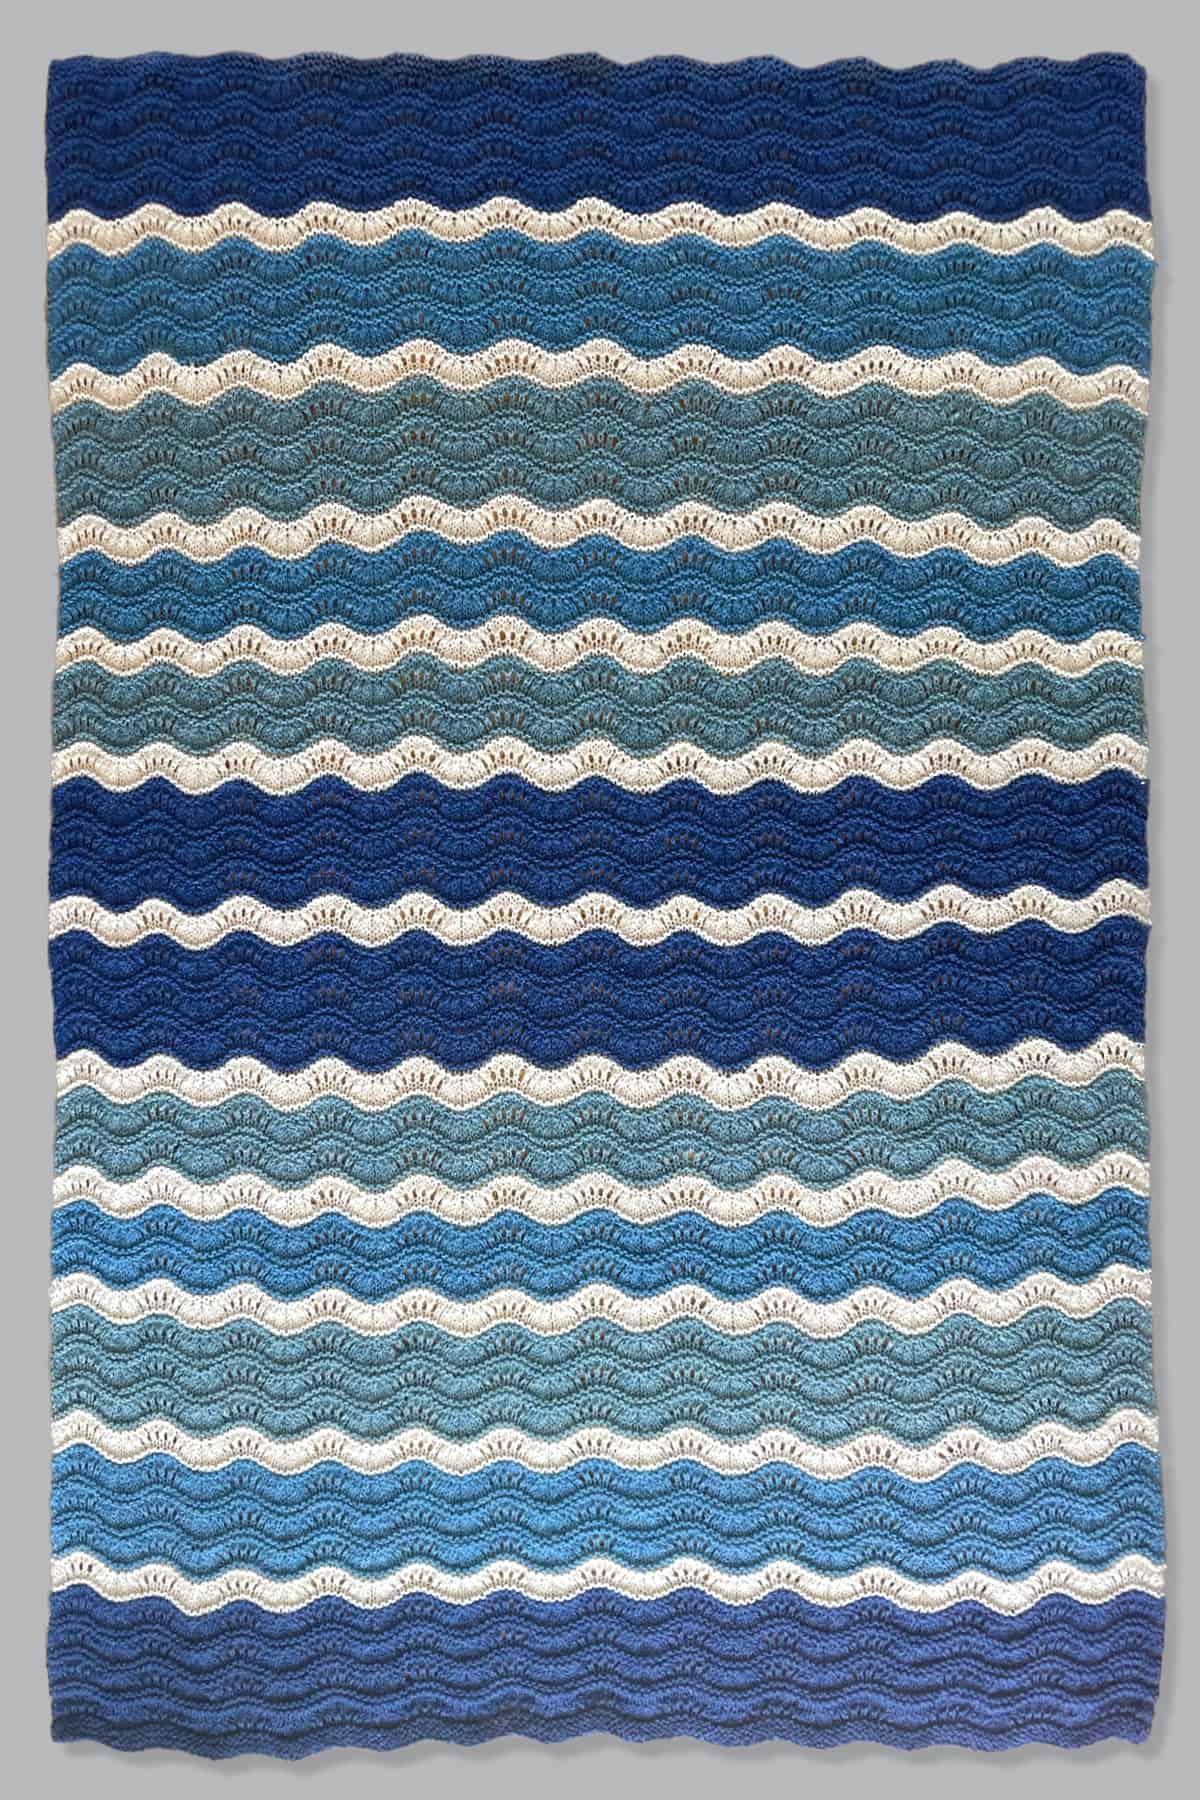 Throw size blanket in full size knitted with shades of blue and white yarn.